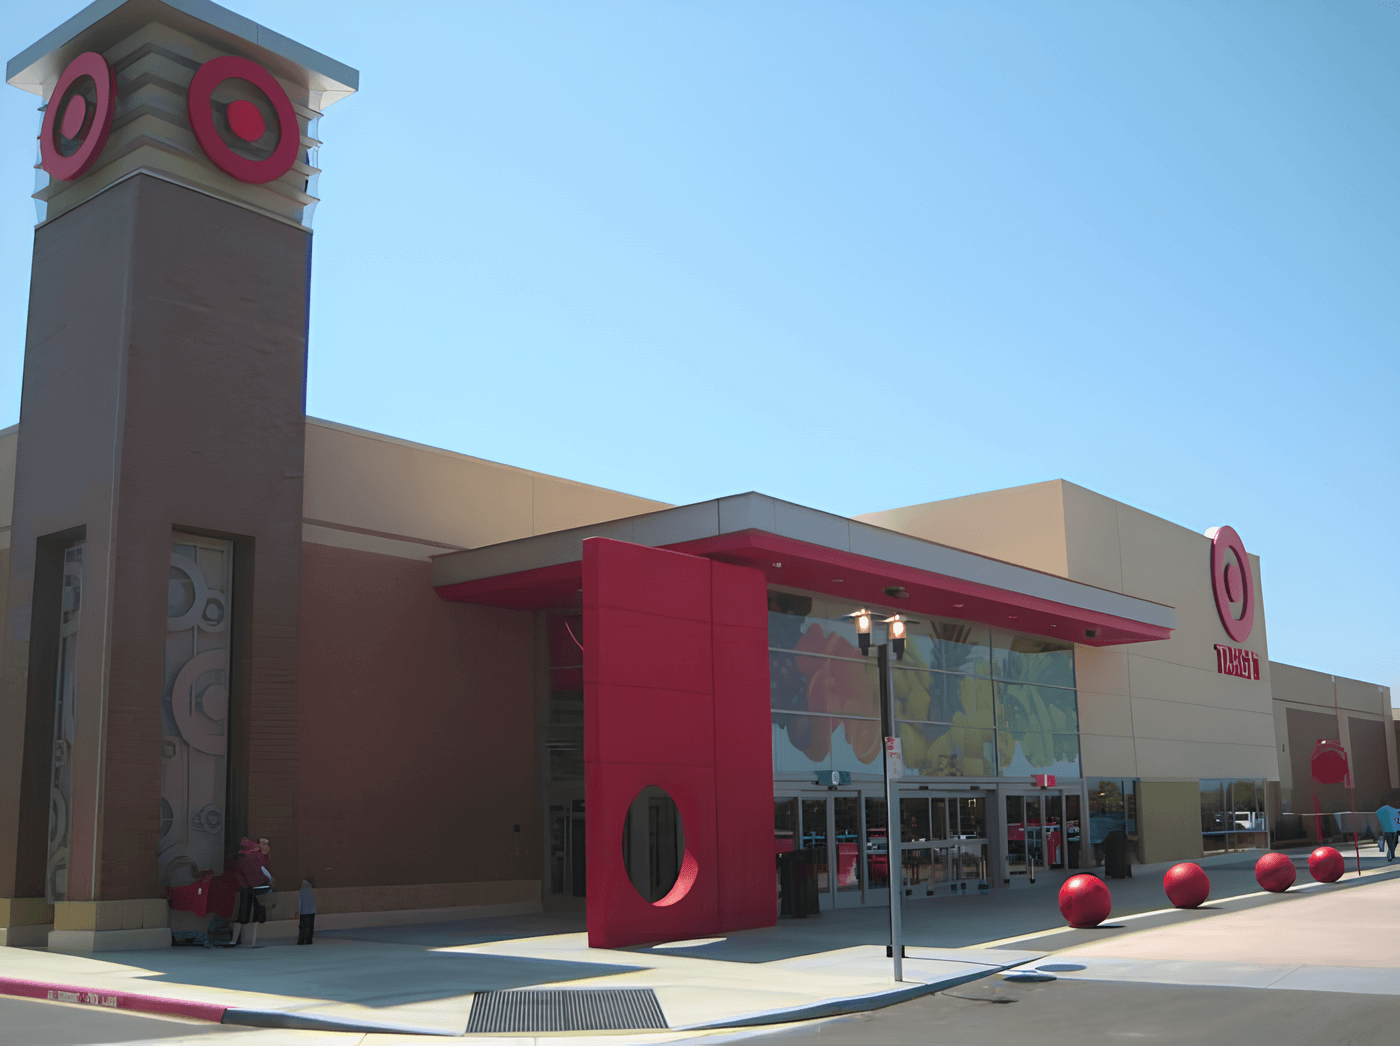 Exterior image of Target in Fremont, California, designed by architect Jeff Finsand.